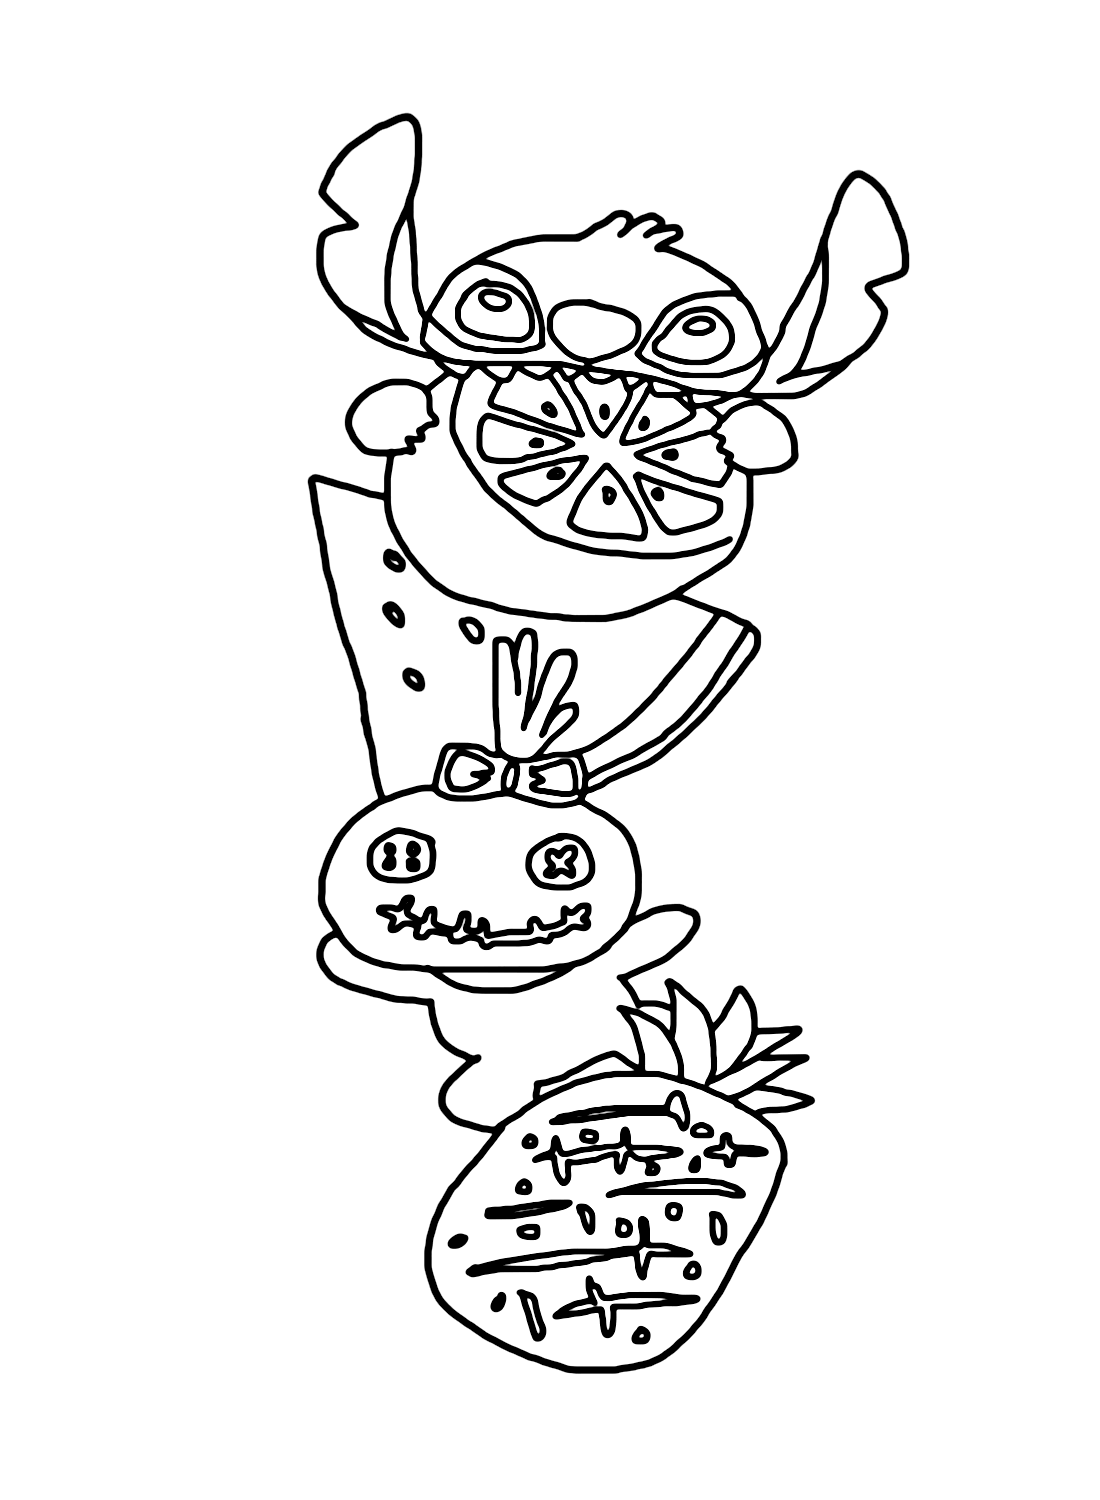 Adorable Cute Stitch Coloring Pages Coloring Page